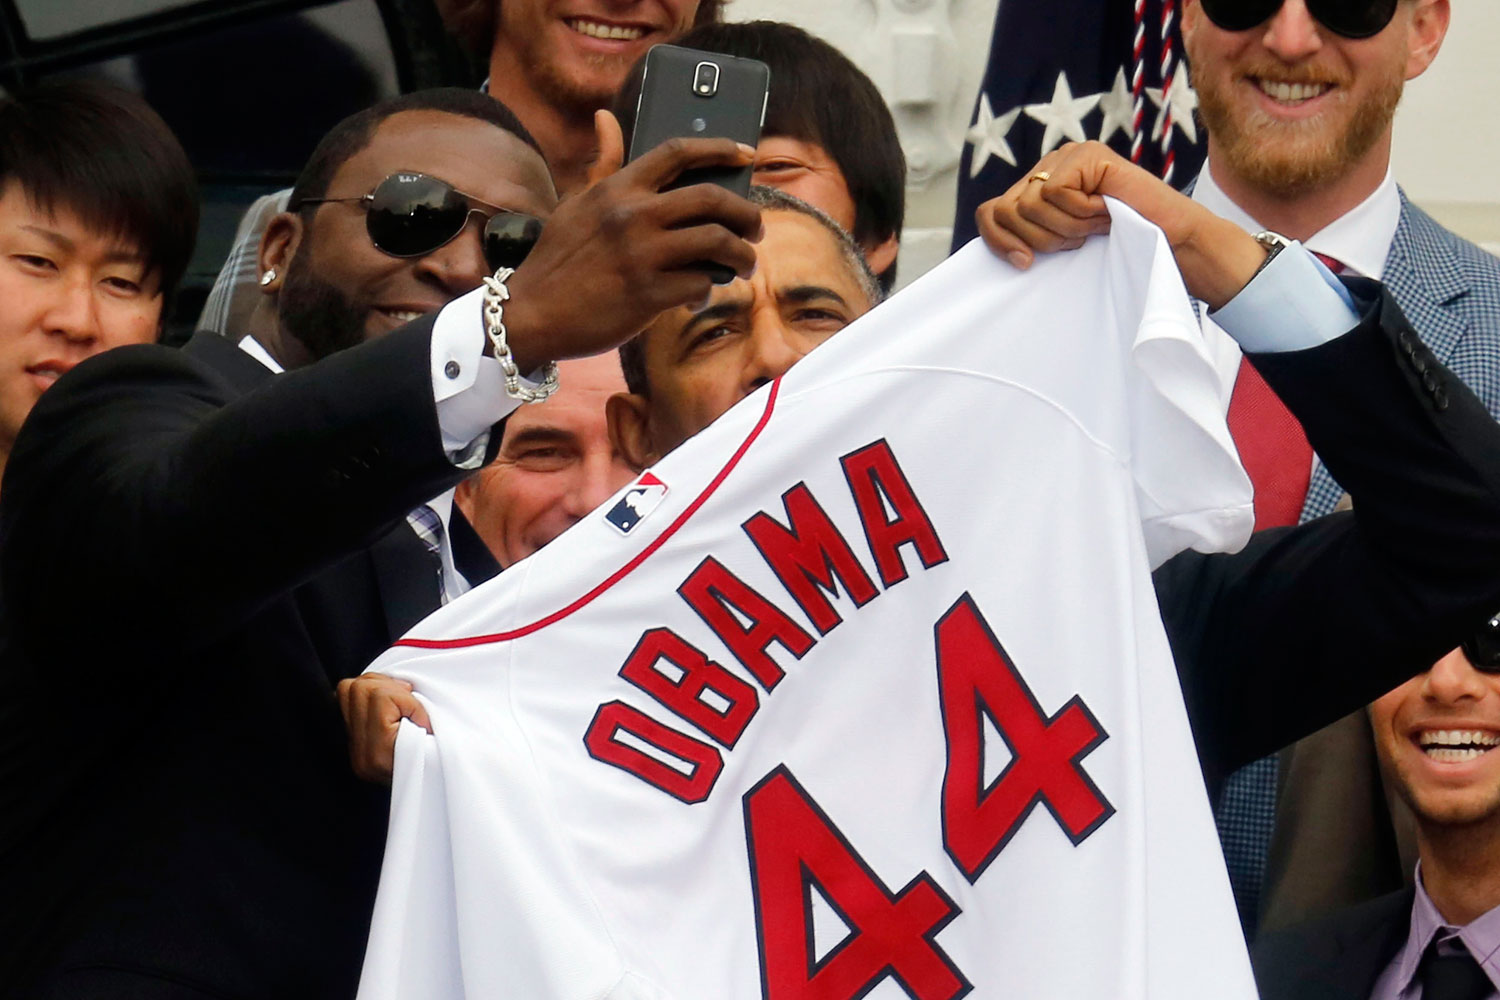 U.S. President Barack Obama poses with star player David Ortiz for a "selfie" as he welcomes the 2013 World Series Champion Boston Red Sox to the South Lawn of the White House in Washington, April 1, 2014. (Larry Downing—Reuters)